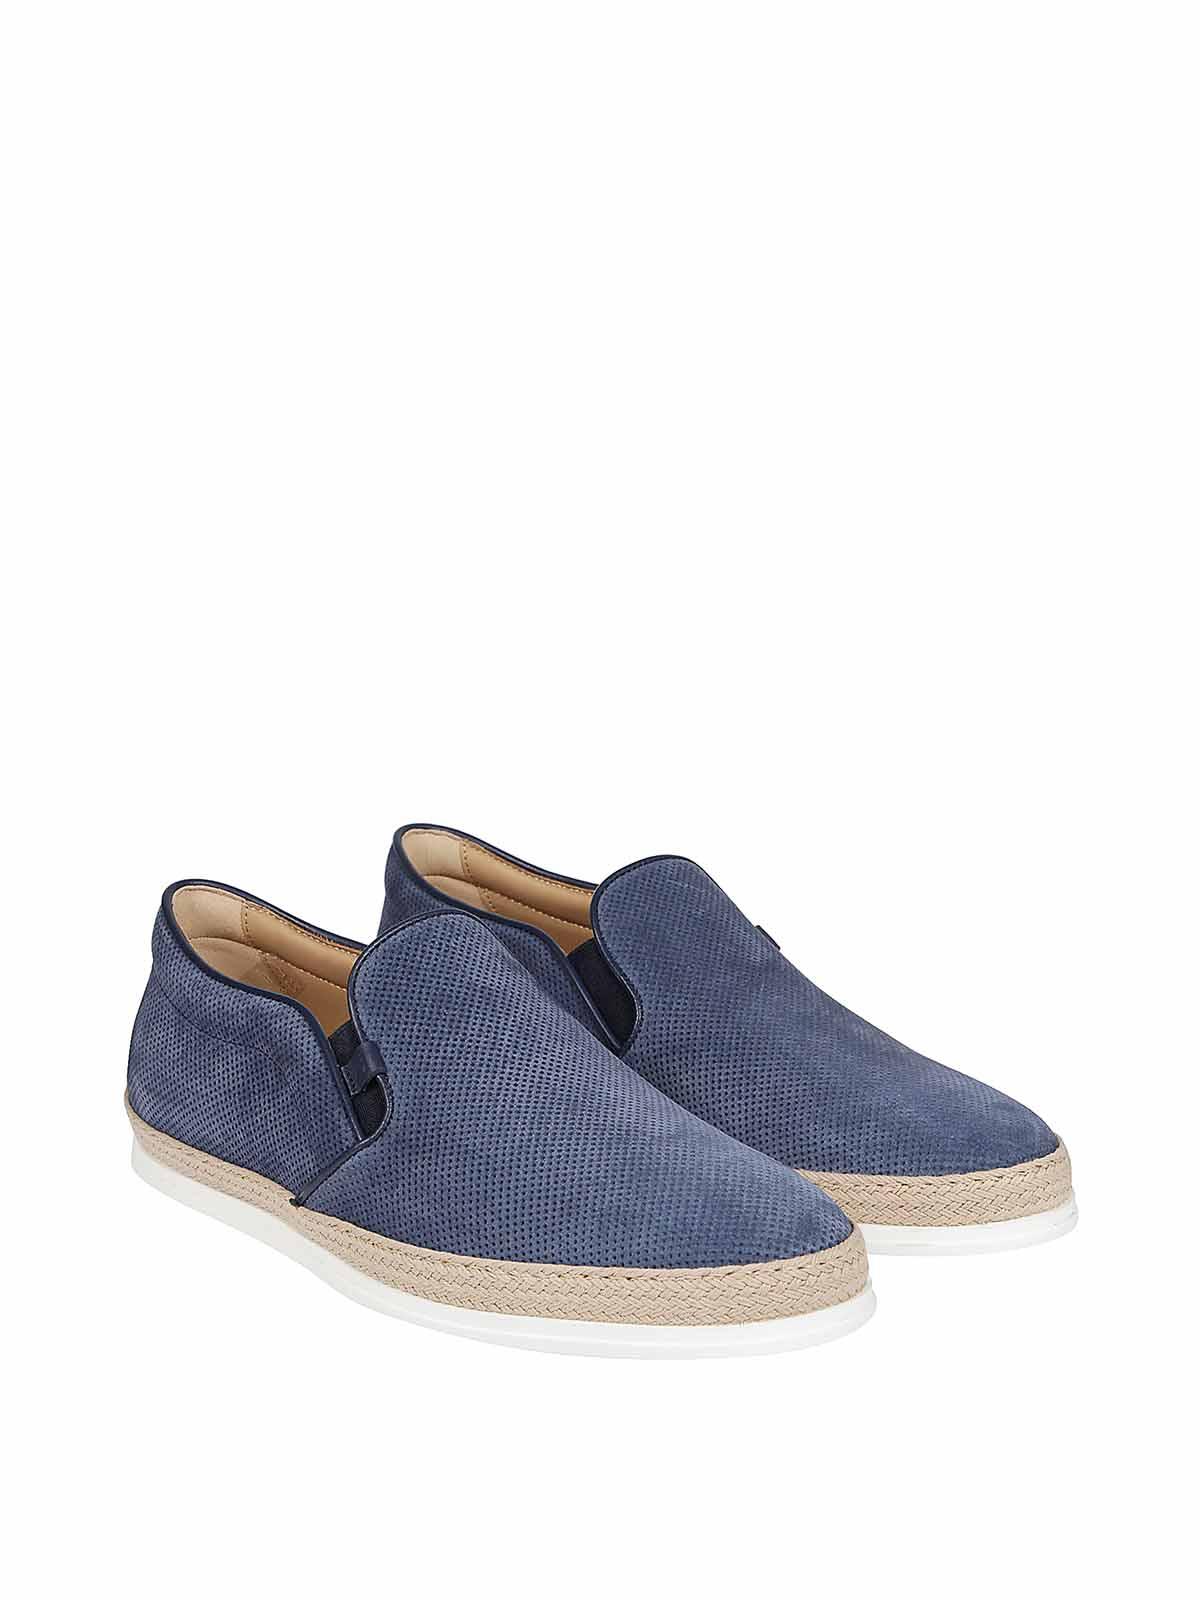 Tod's Suede Slippers in Blue for Men - Lyst